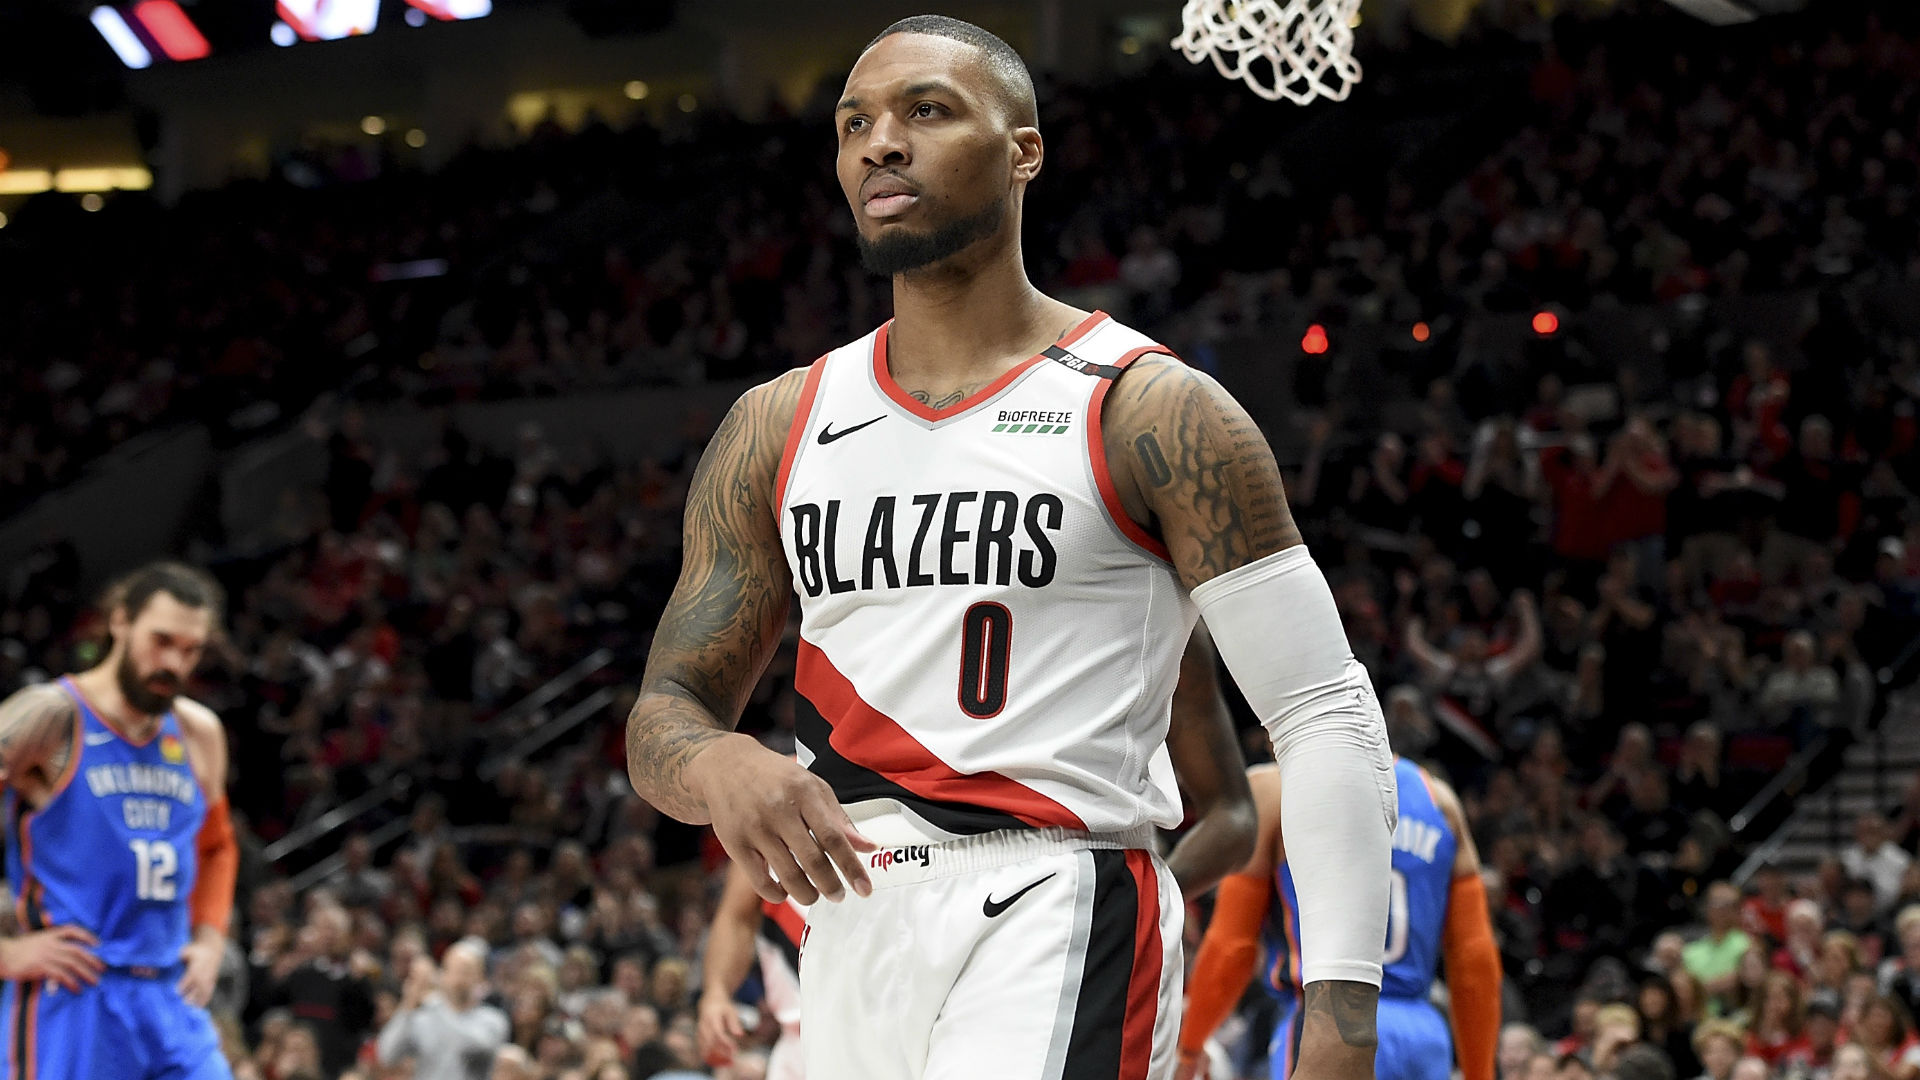 NBA Playoffs 2019: Damian Lillard says 'it's good to get back on the winning side, but ...